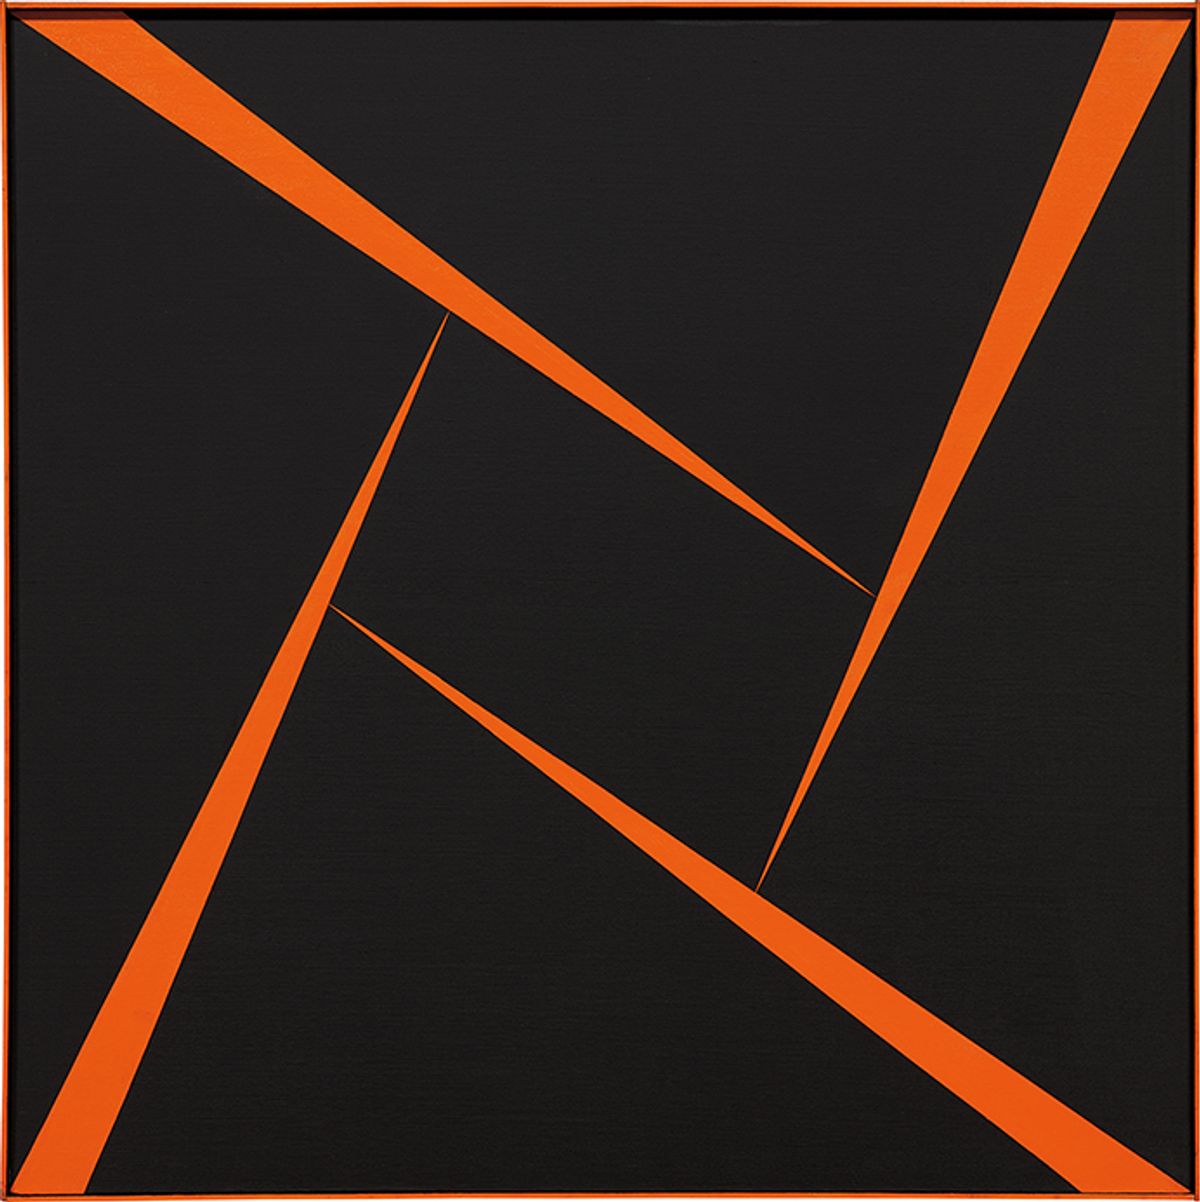 Carmen Herrera's Untitled (Orange and Black) (1956) sold for an artist-record $1.2m in Phillips' 20th Century and Contemporary Art evening sale in New York in November 2017 Courtesy of Phillips